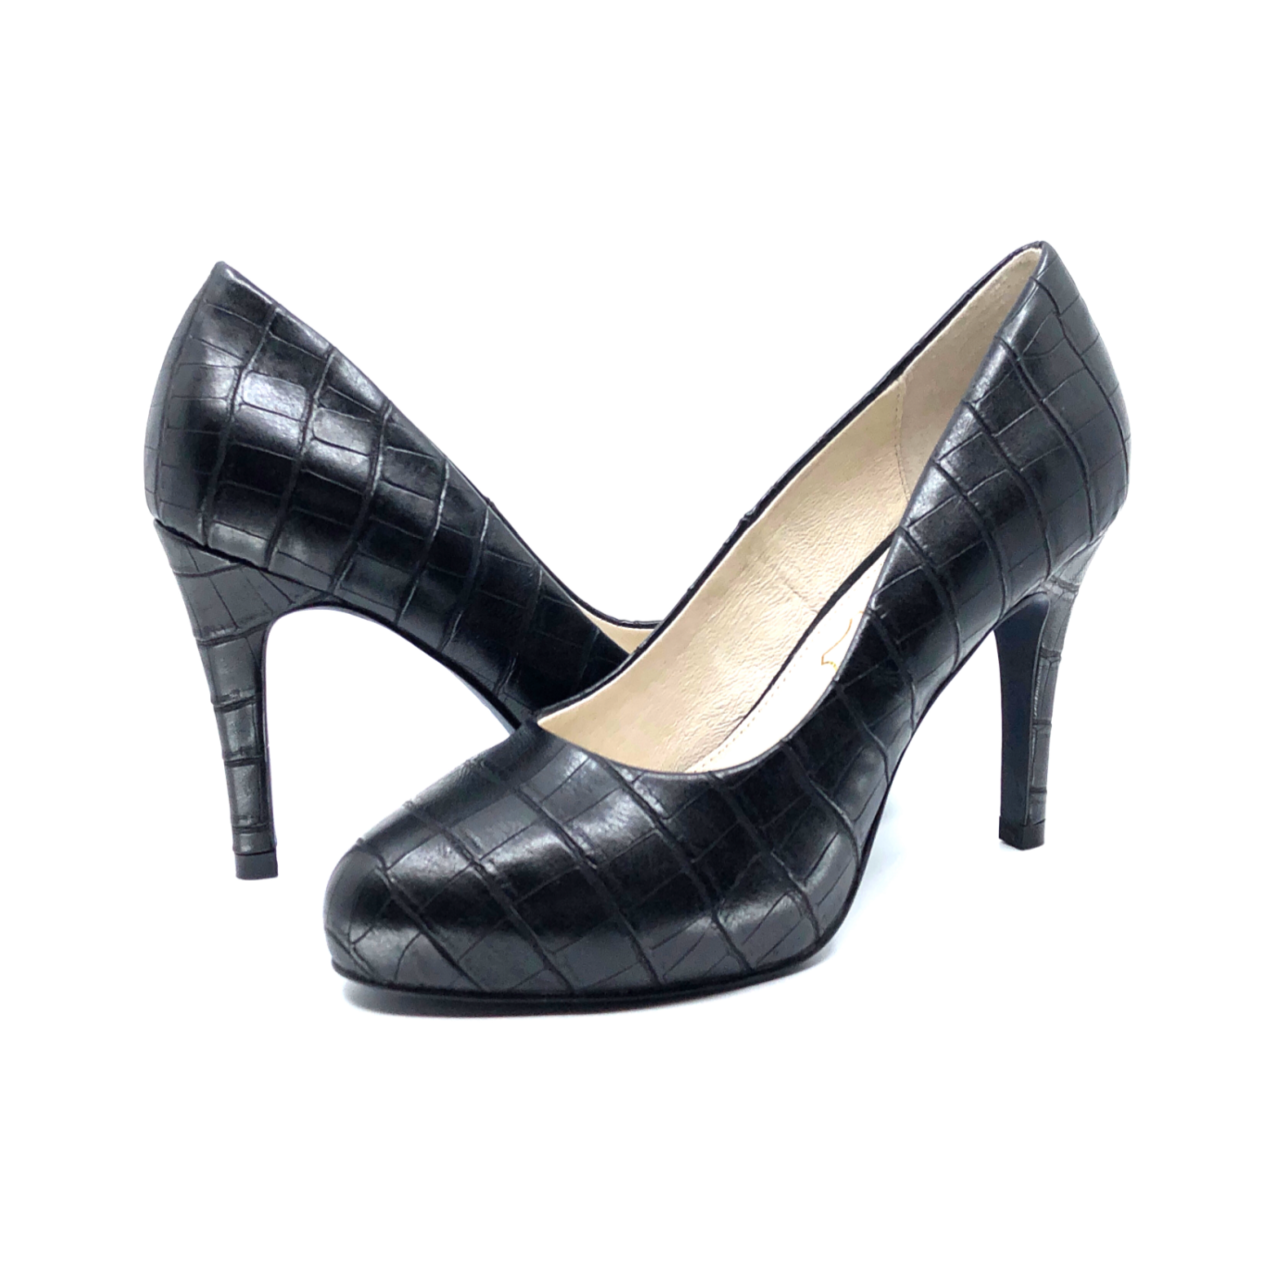 Leather Semi Pointed High Heel Pump - Eclipse